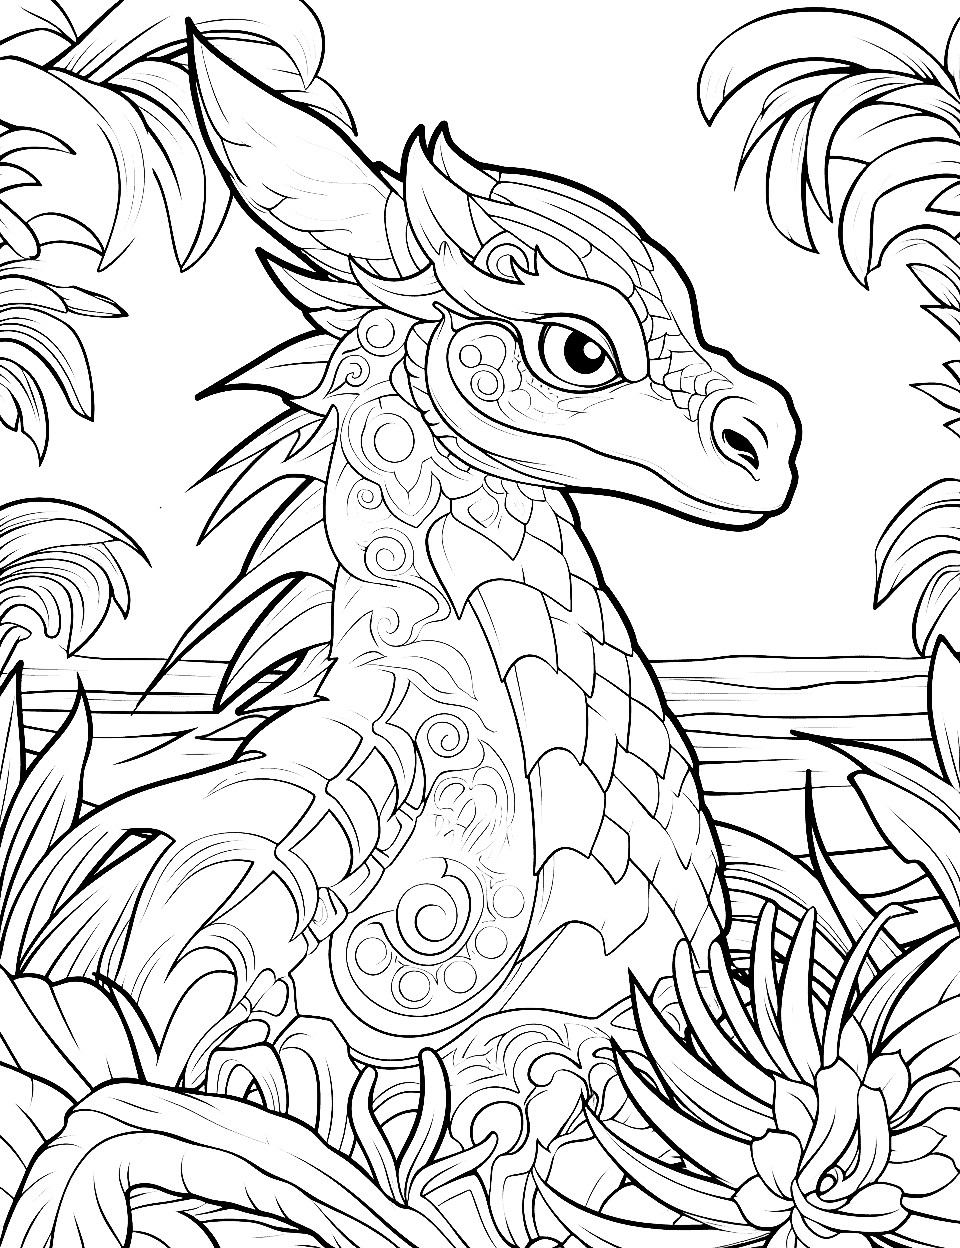 Tropical Dragon Adventure Adult Coloring Page - A tropical scene with a dragon surrounded by lush flowers and plants.